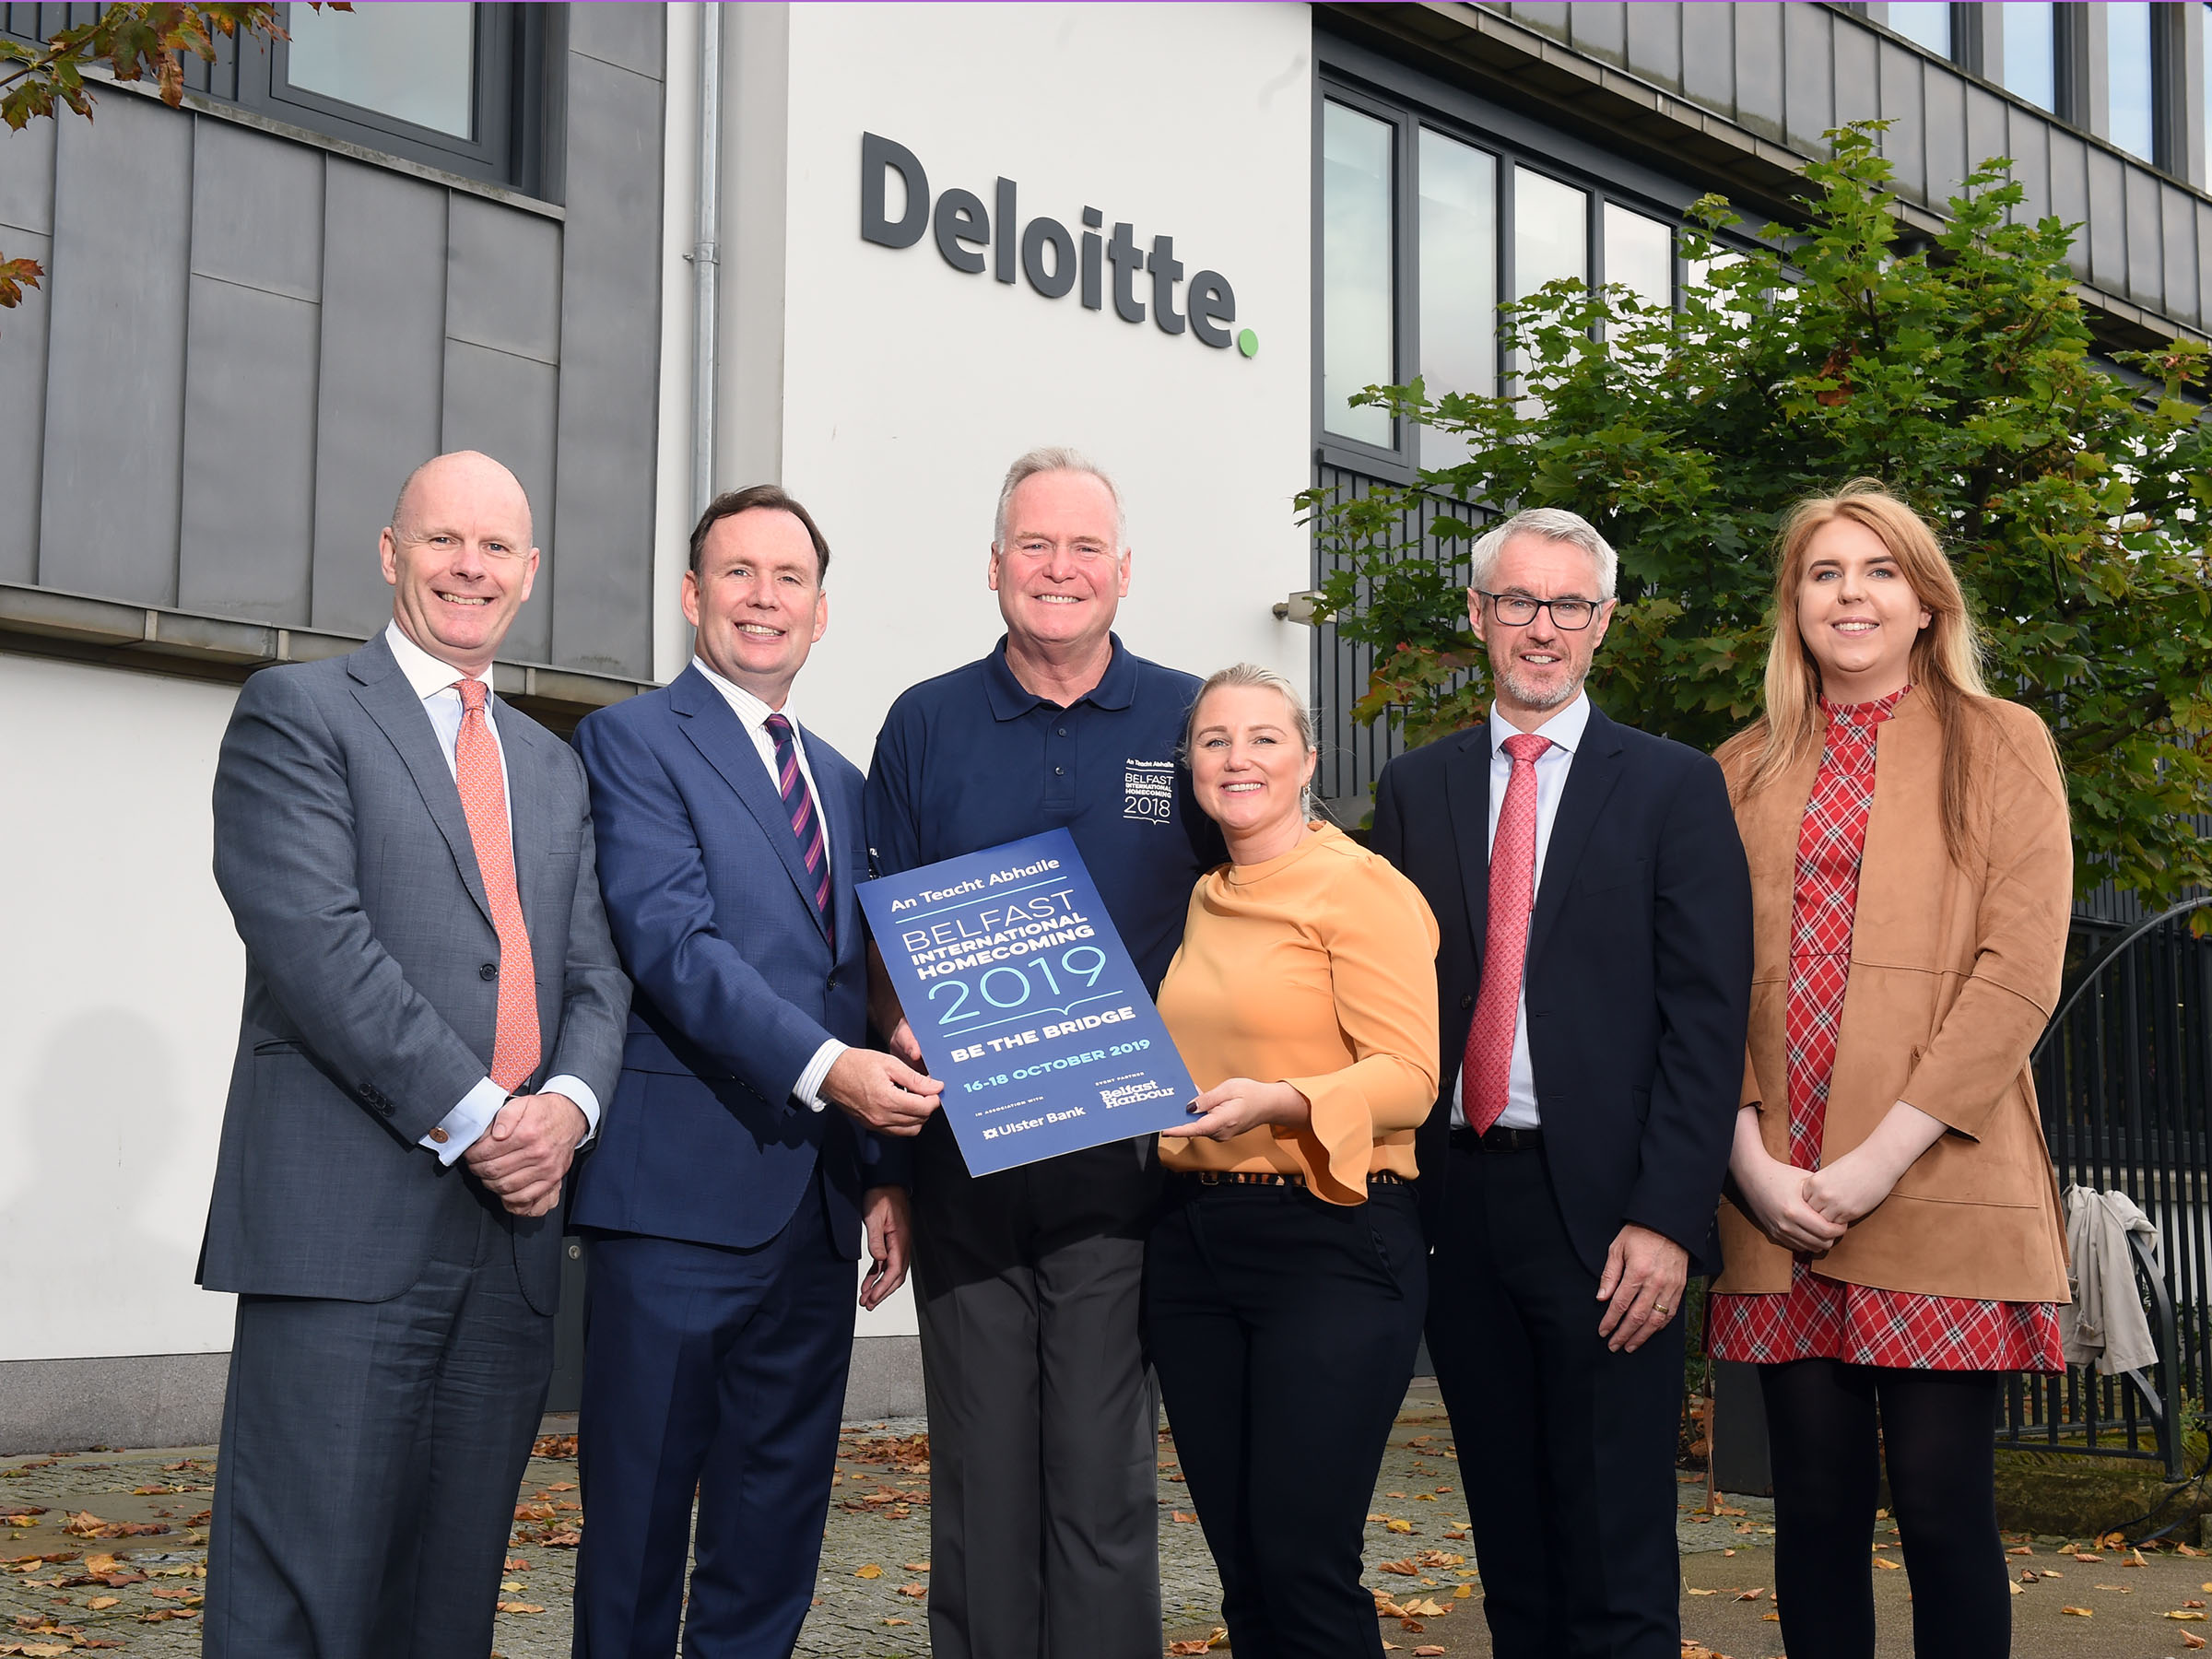 Belfast International Homecoming Conference Launched